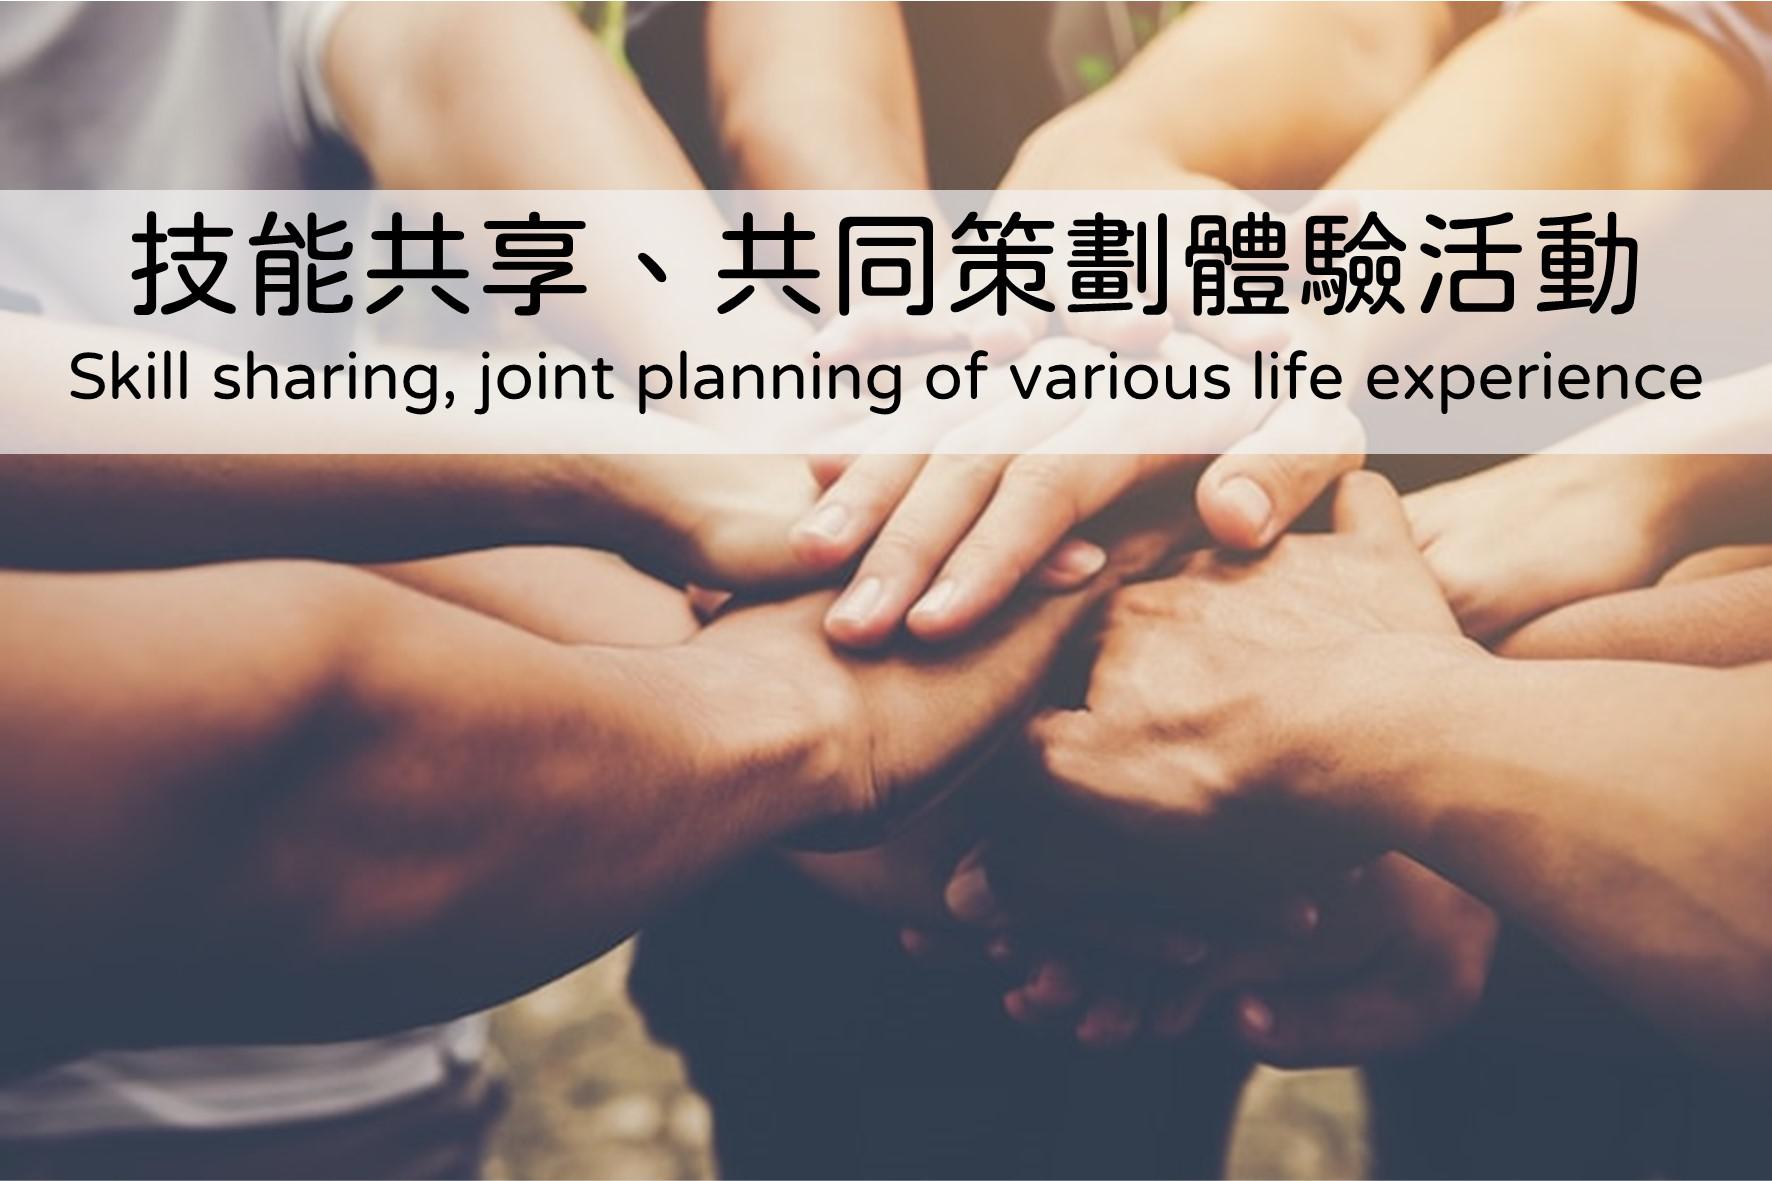 Skill sharing, joint planning of various life experience